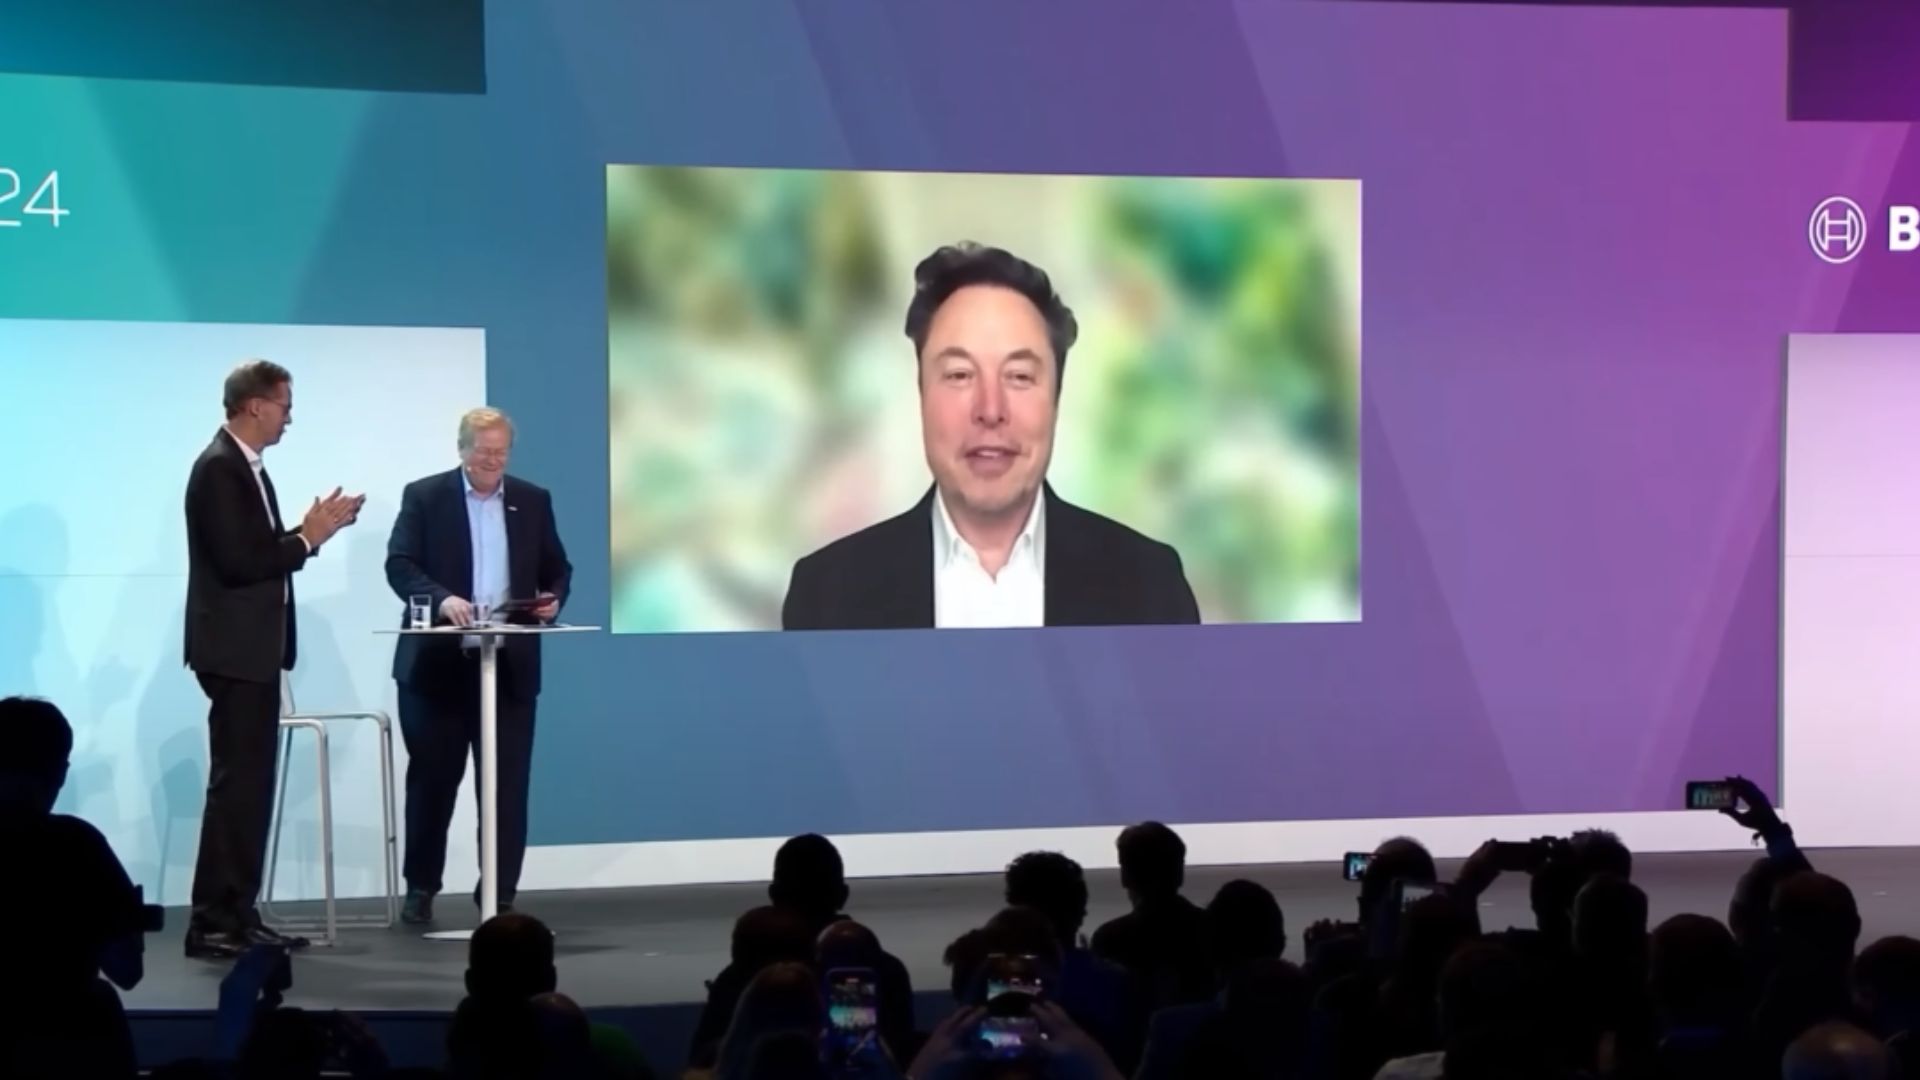 Elon Musk says we're on the verge of the biggest technology revolution with AI, but there won't be enough power by 2025